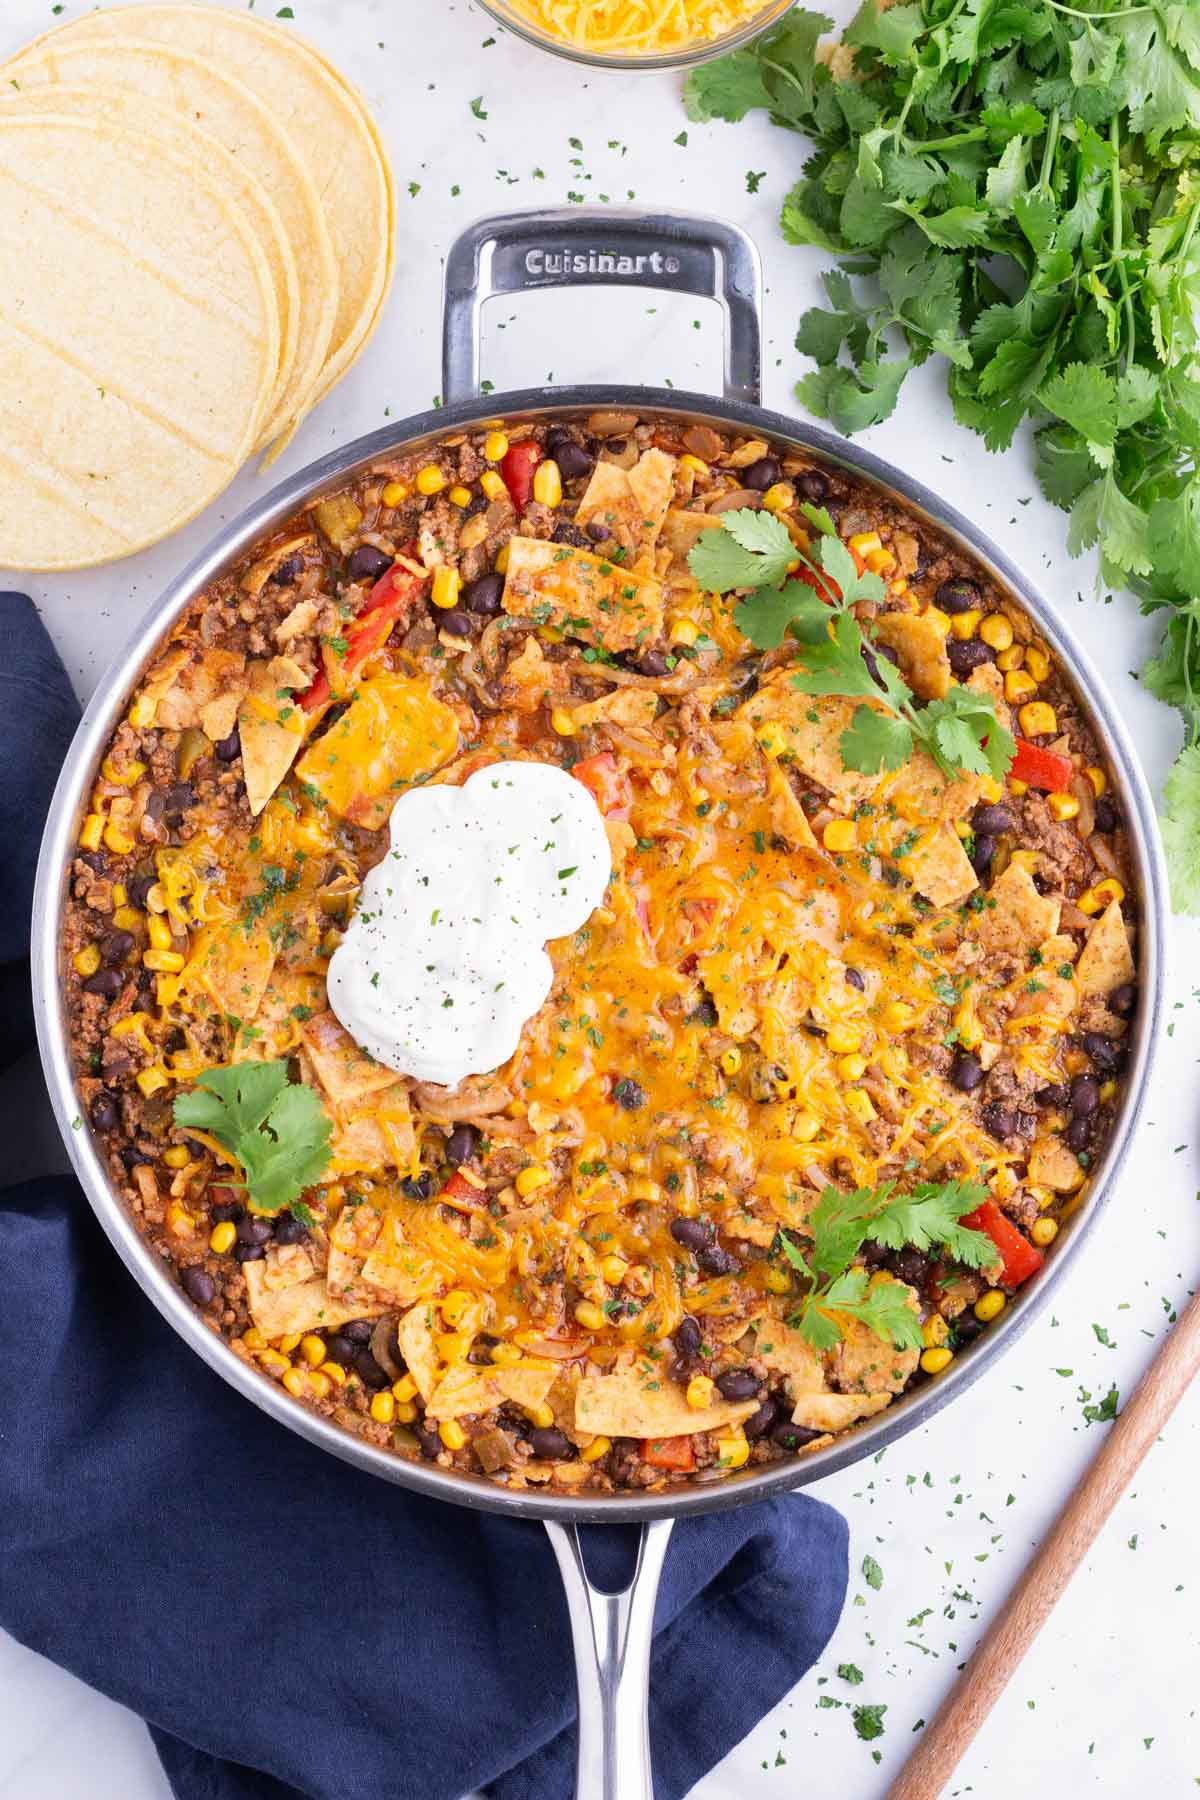 This beef taco skillet is topped with cheese and sour cream.